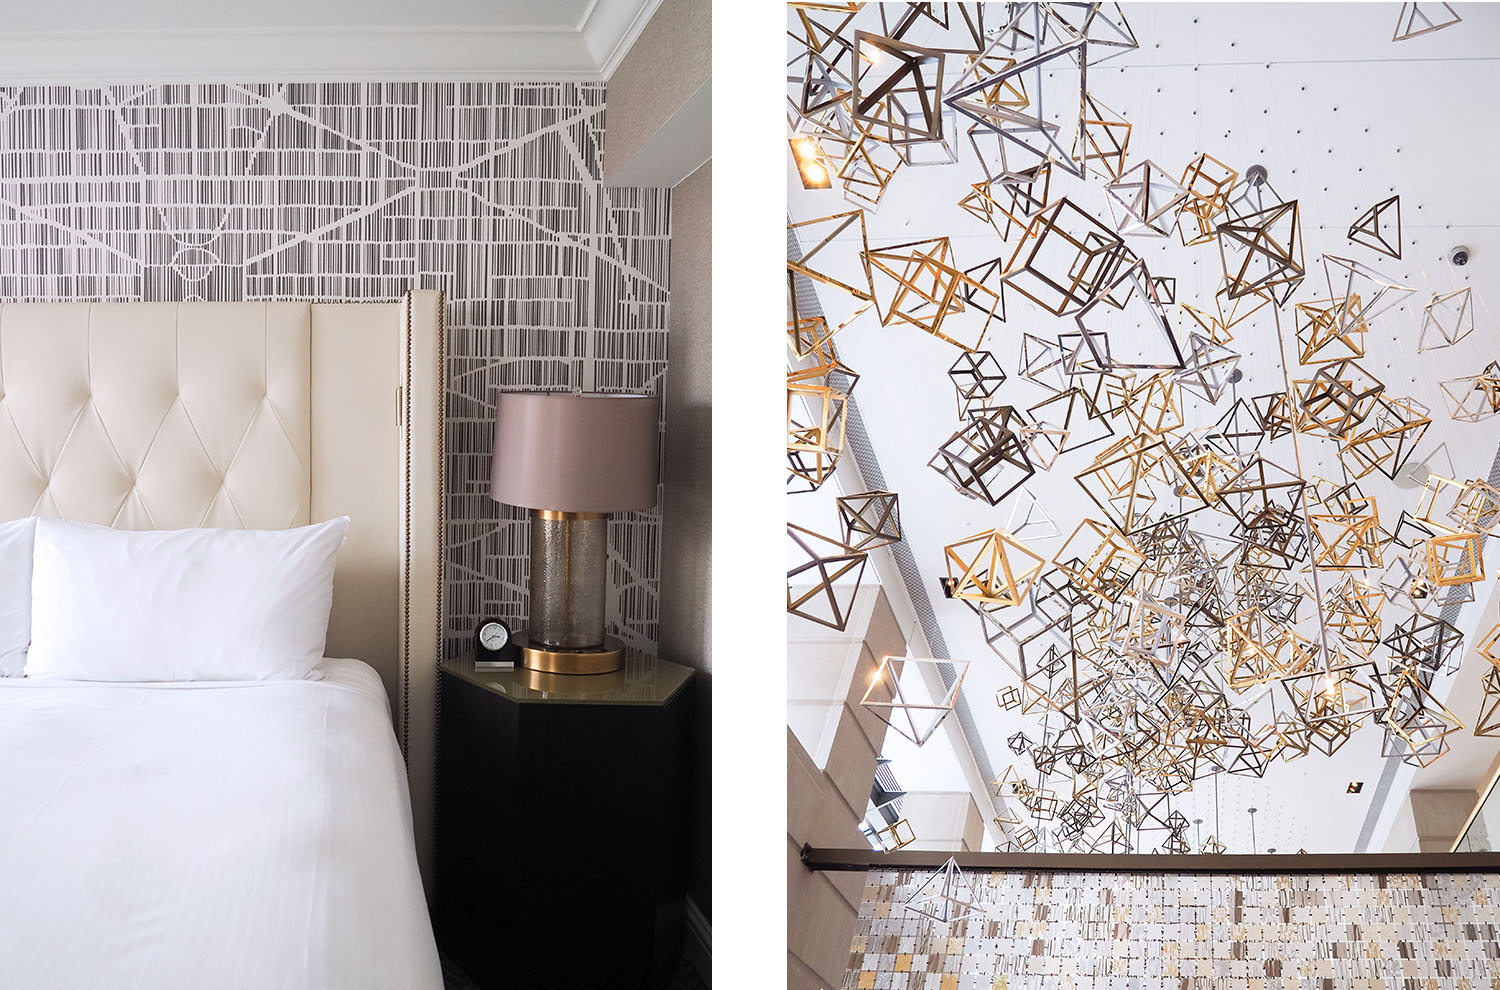 A tufted bed and golden charms hanging from the ceiling at the Fairmont Washington DC - Georgetown, as captured by Winnipeg travel blogger Cee Fardoe of Coco & Vera